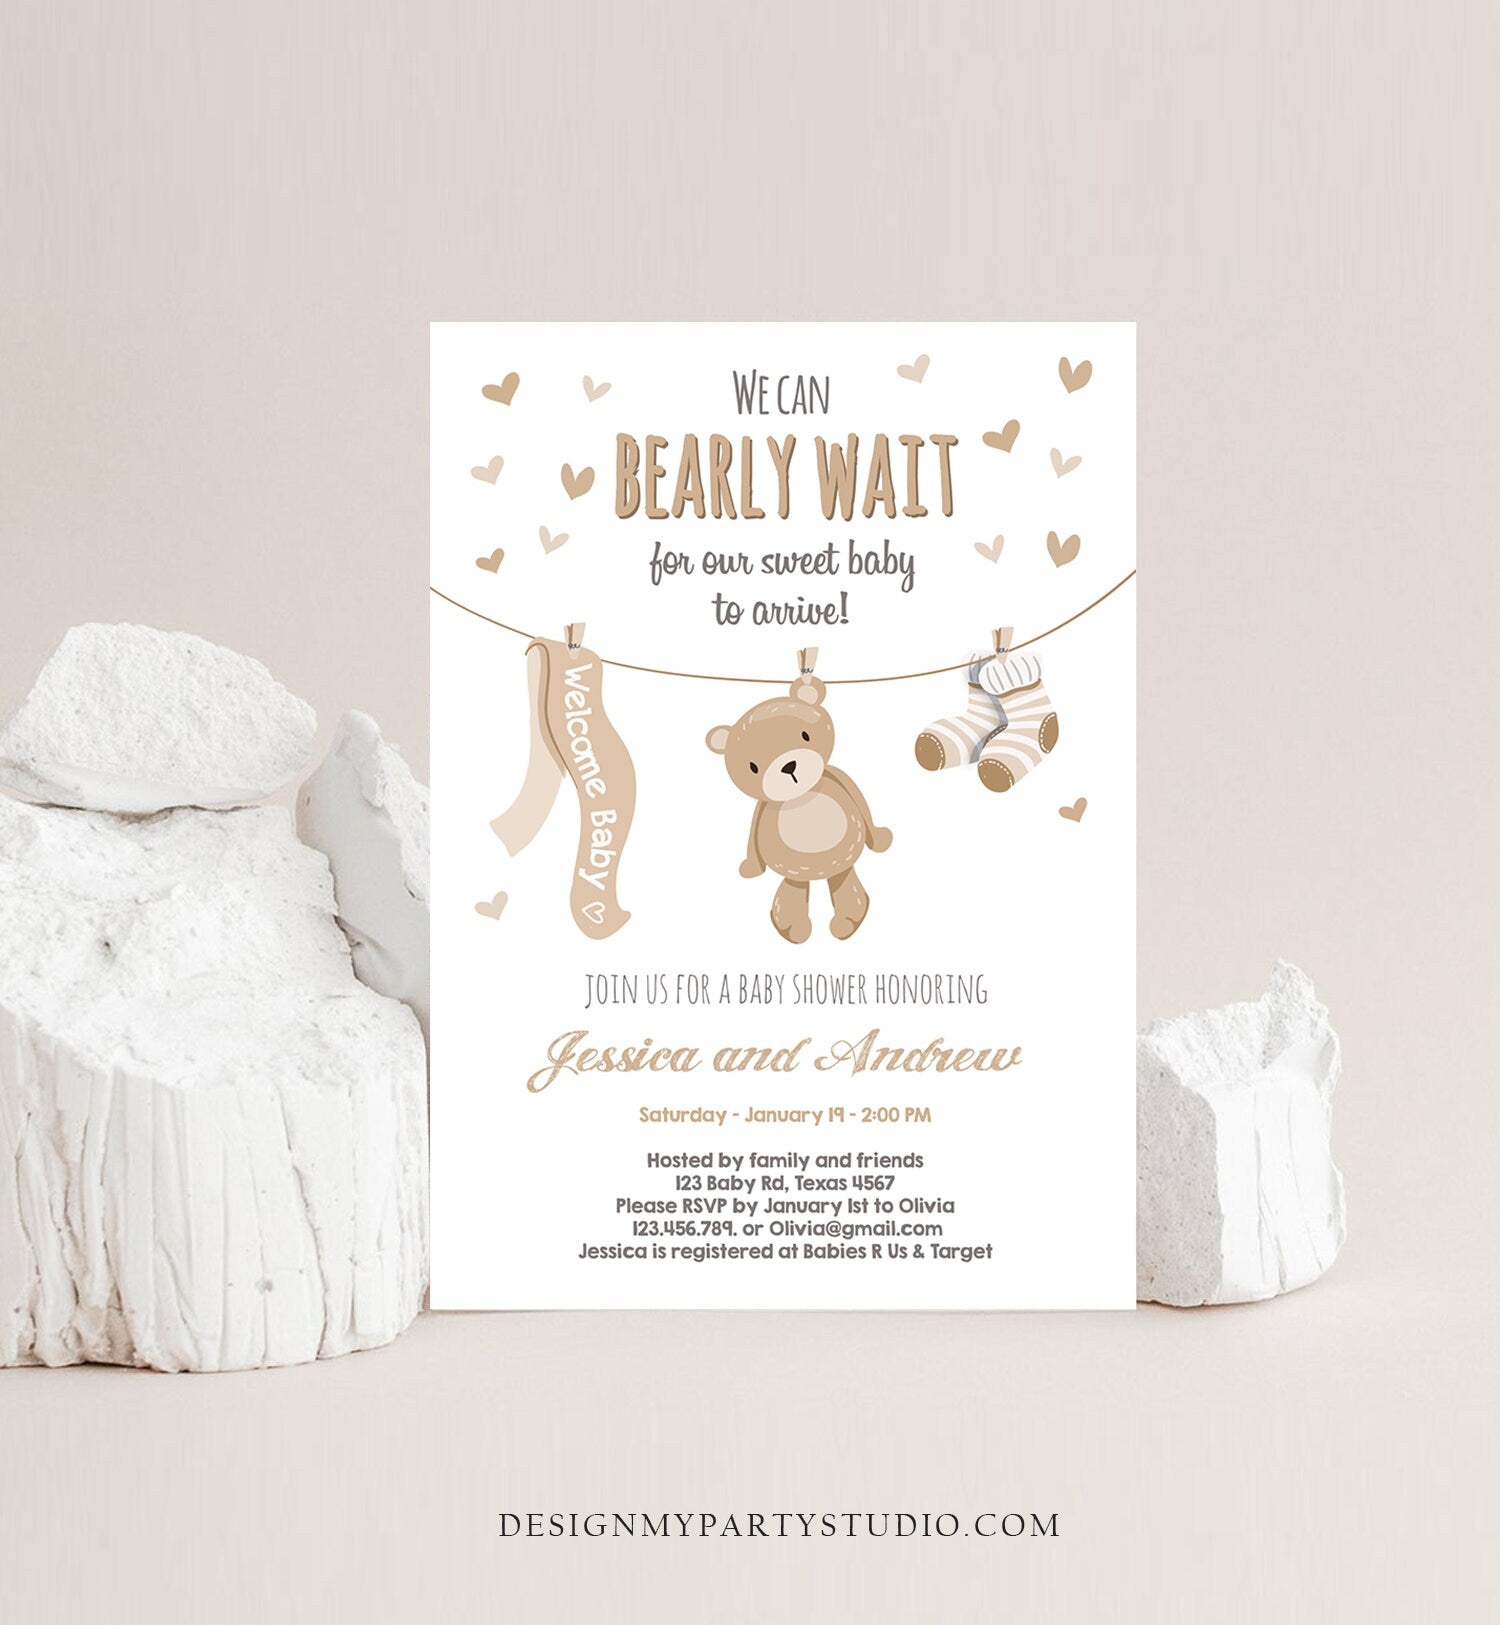 Editable Teddy Bear Baby Shower Invitation Gender Neutral We Can Bearly Wait Couples Shower Invite Template Instant Download Corjl 0025